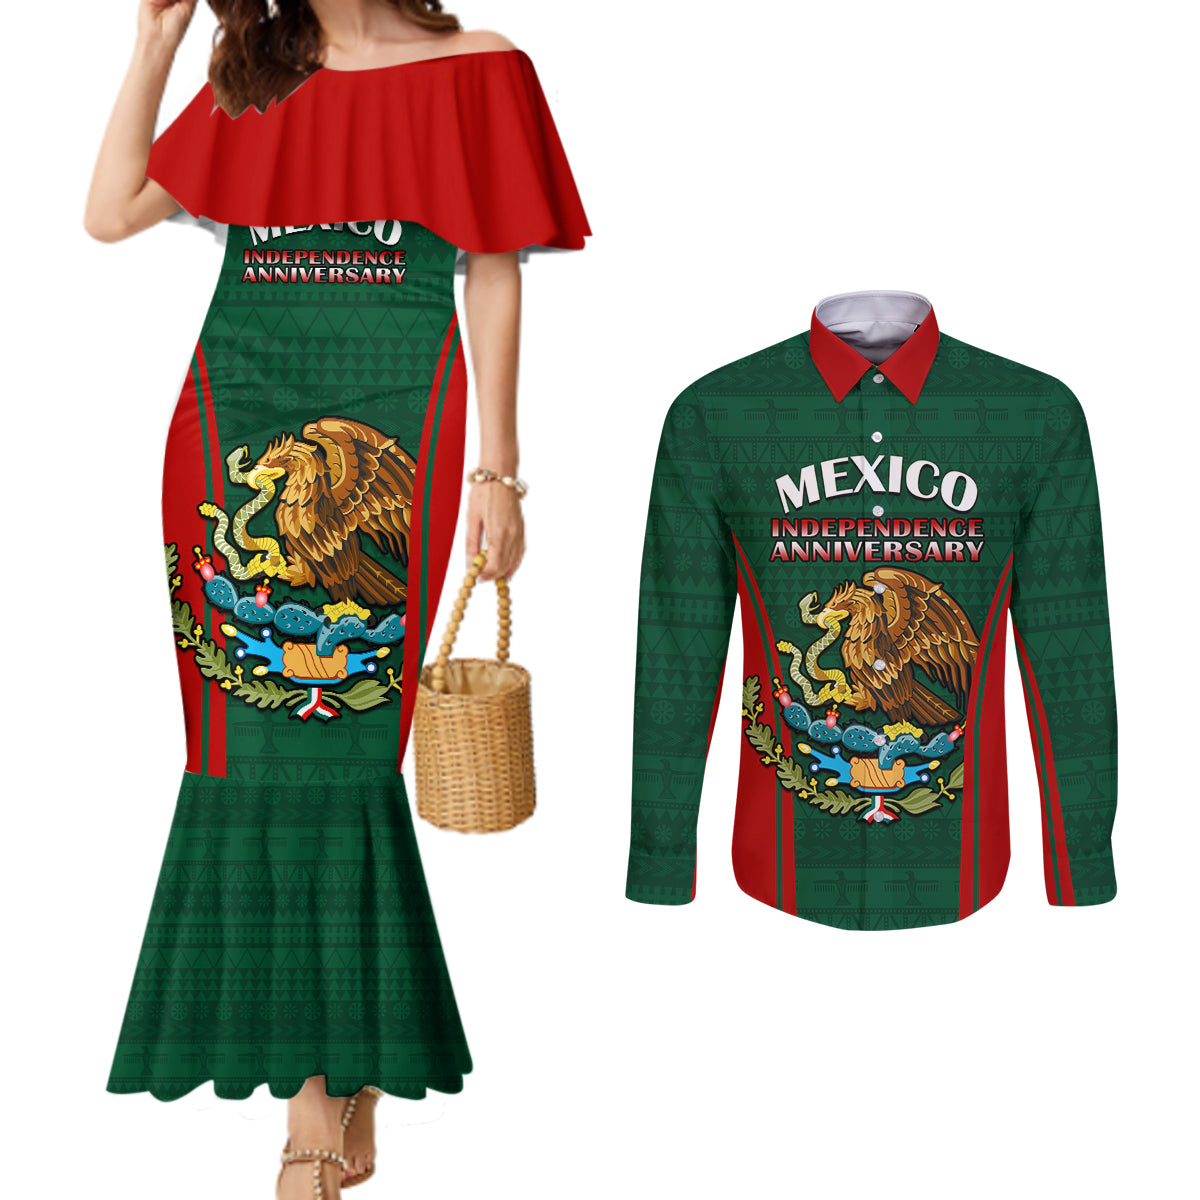 mexico-independence-day-couples-matching-mermaid-dress-and-long-sleeve-button-shirts-happy-213th-anniversary-mexican-proud